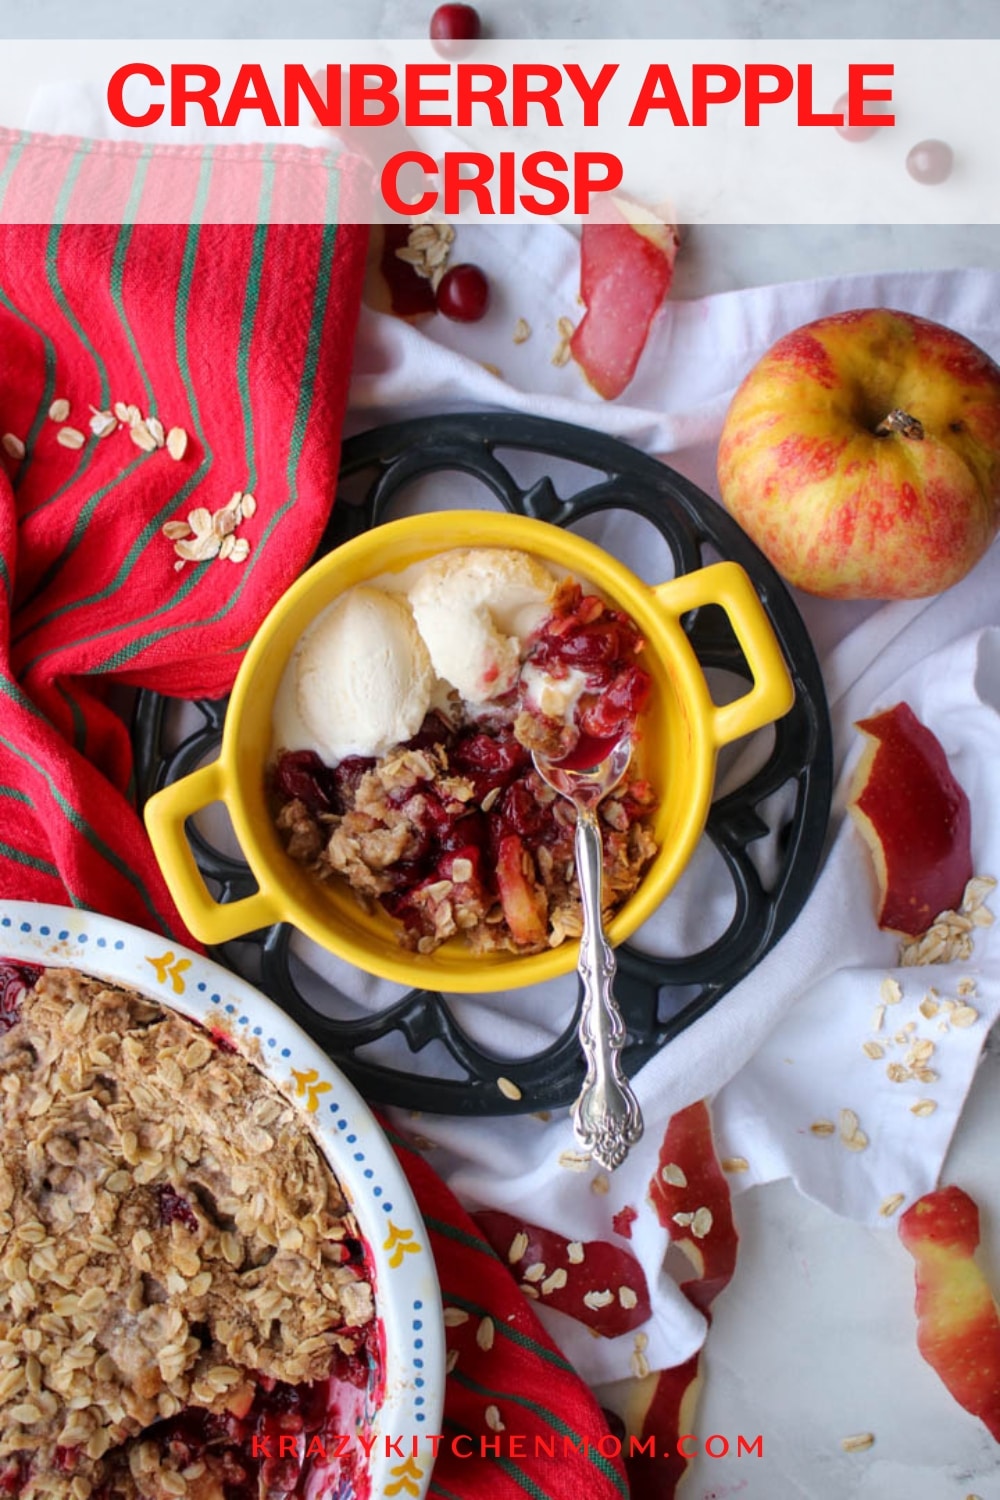 Fall and winter are my favorite seasons to make fruit crisps. For this recipe, I used fresh cranberries, apples, and warm seasonal spices. via @krazykitchenmom